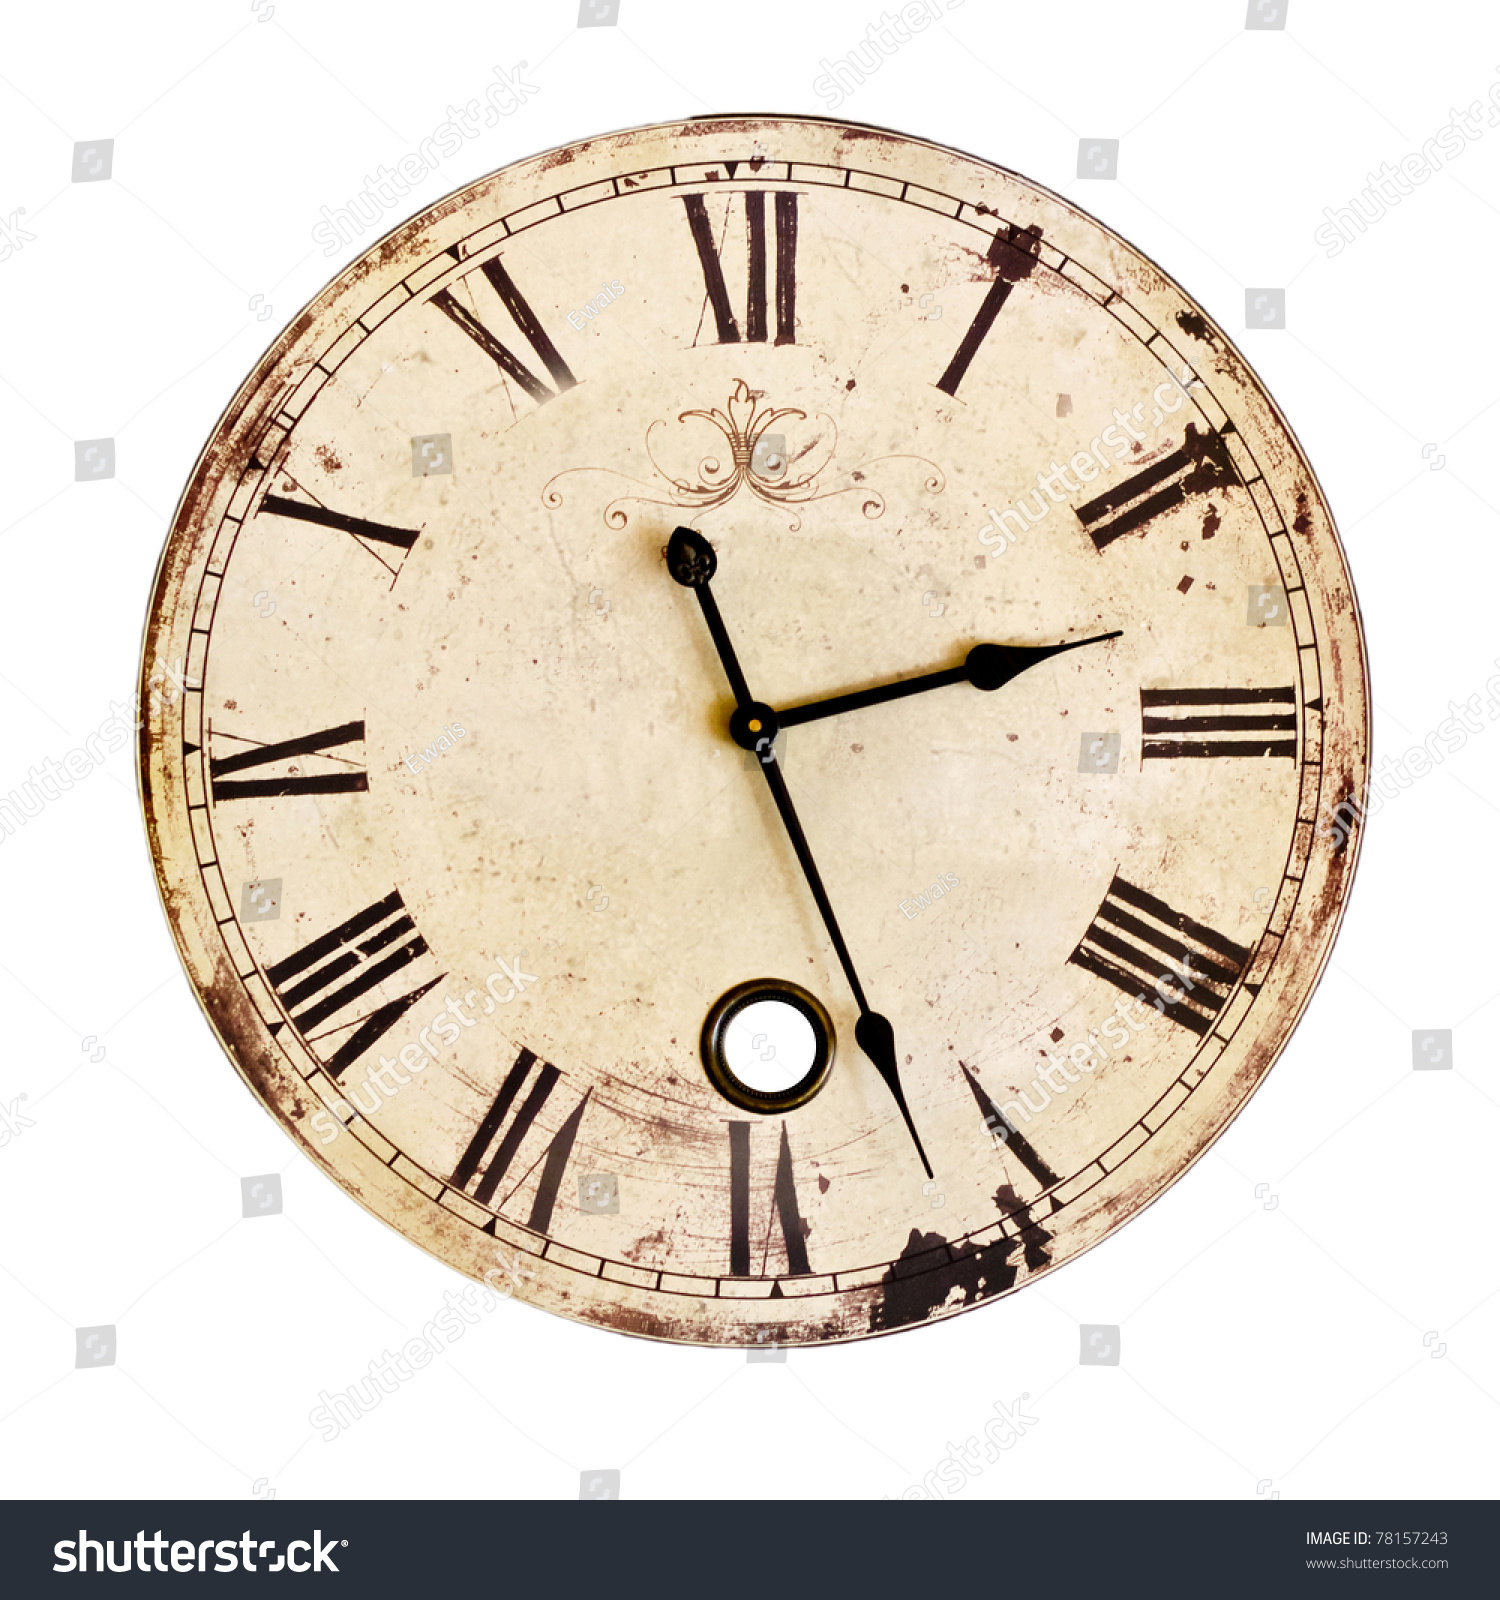 Old Clock Isolated On White Old Stock Photo 78157243 - Shutterstock